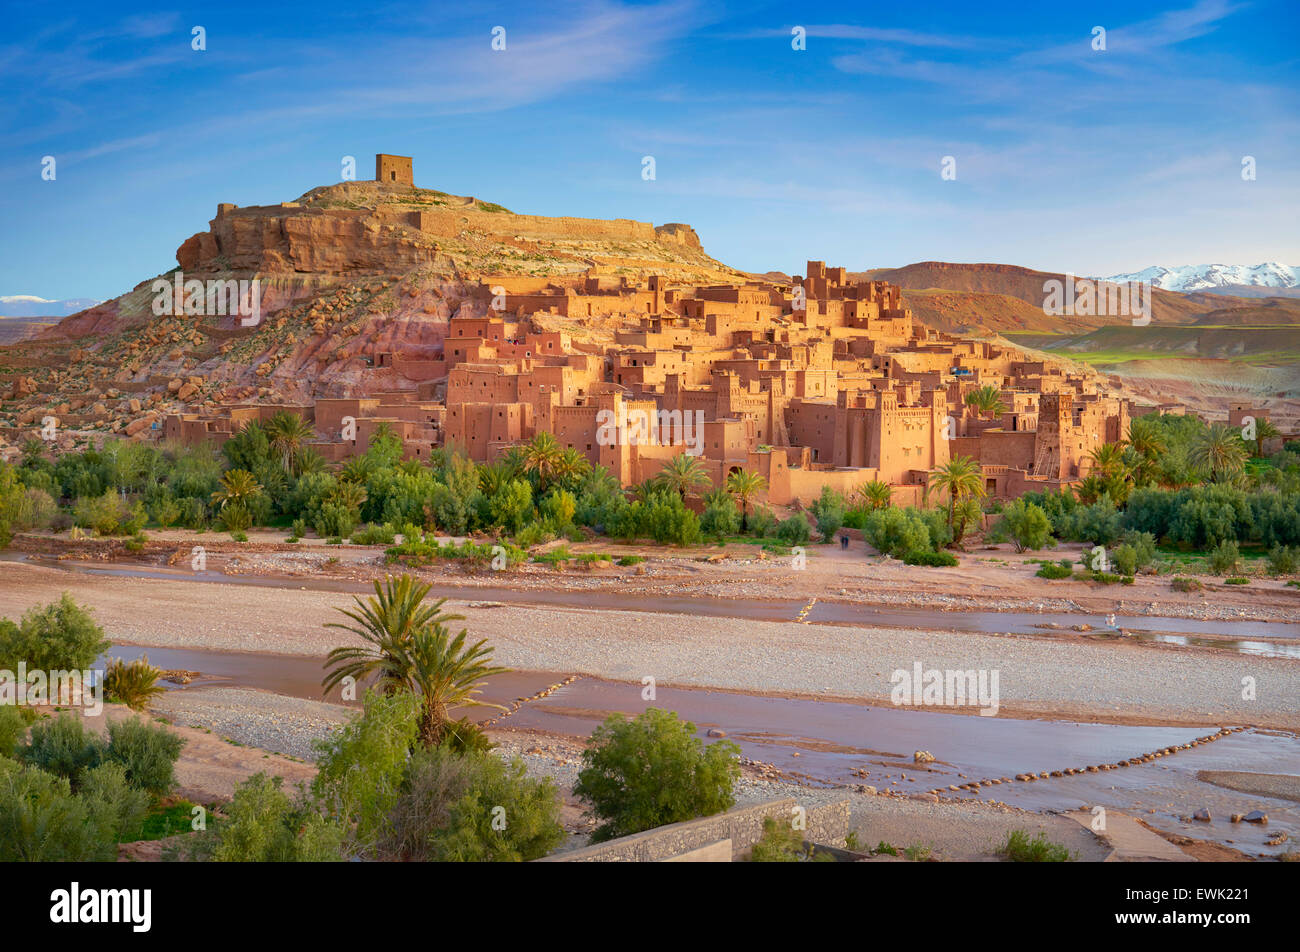 View of Ait Benhaddou Kasbah, Morocco, Africa Stock Photo